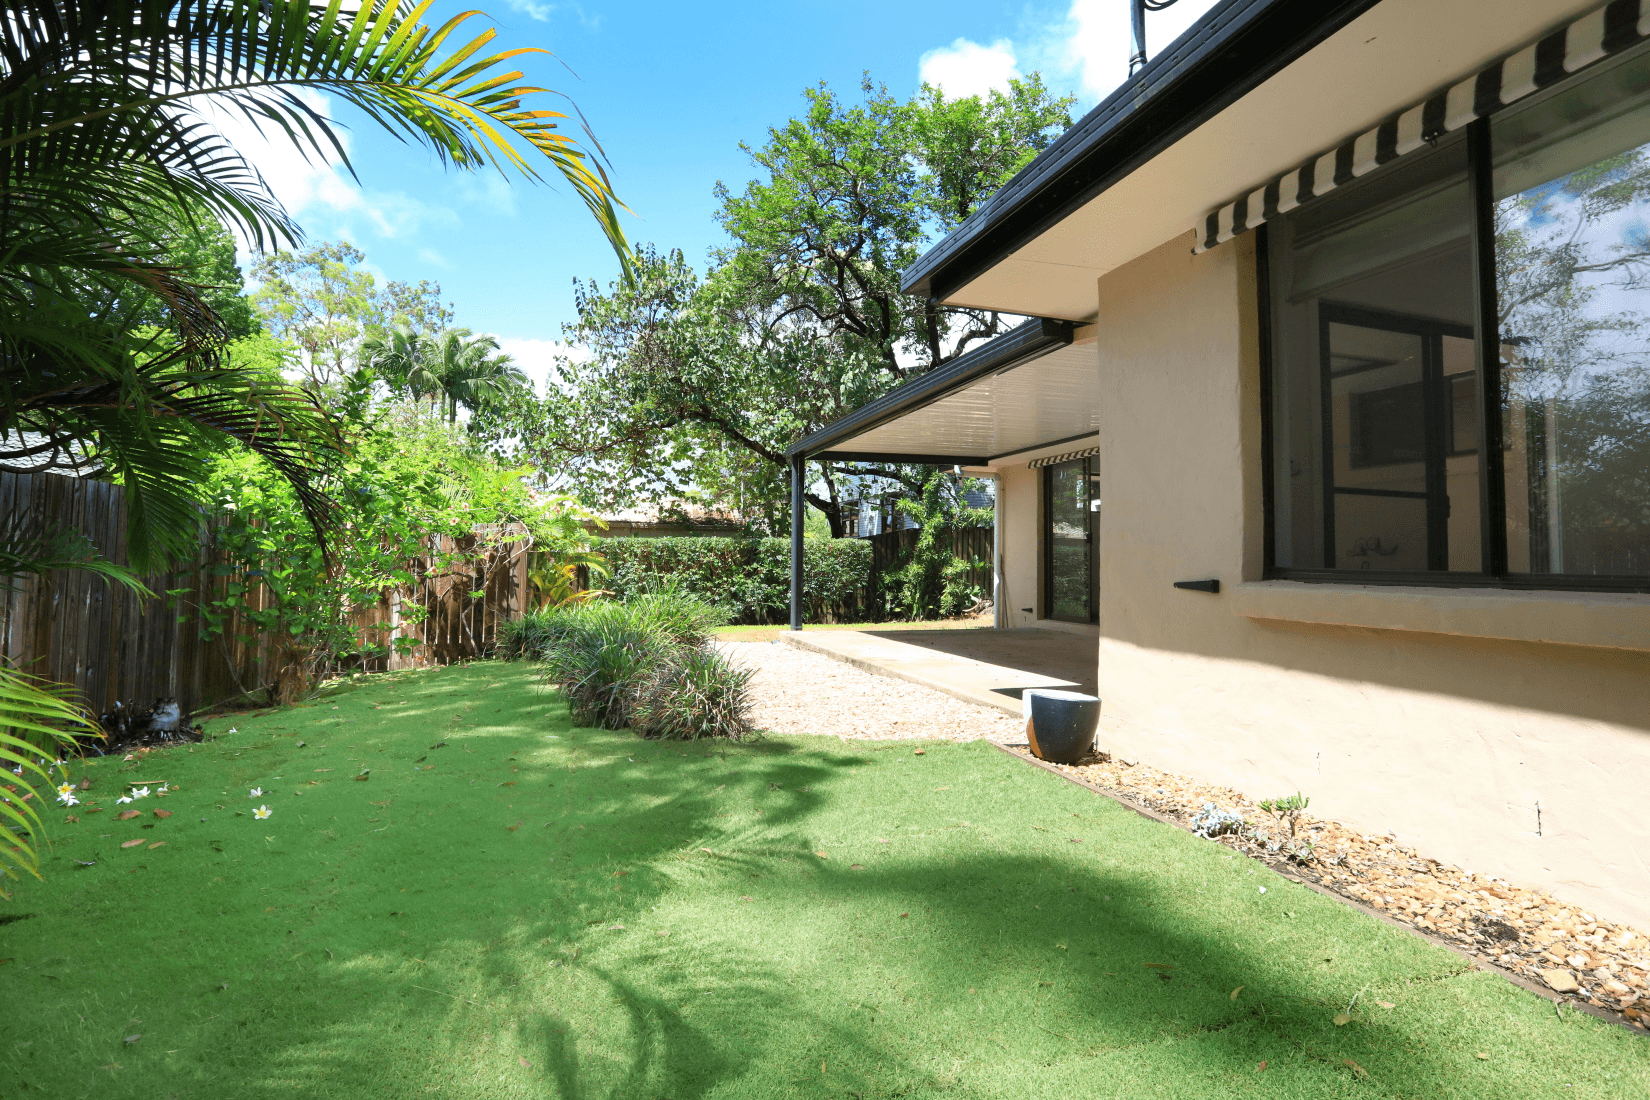 696 Southport Nerang Road (Ned Easement), ASHMORE, QLD 4214